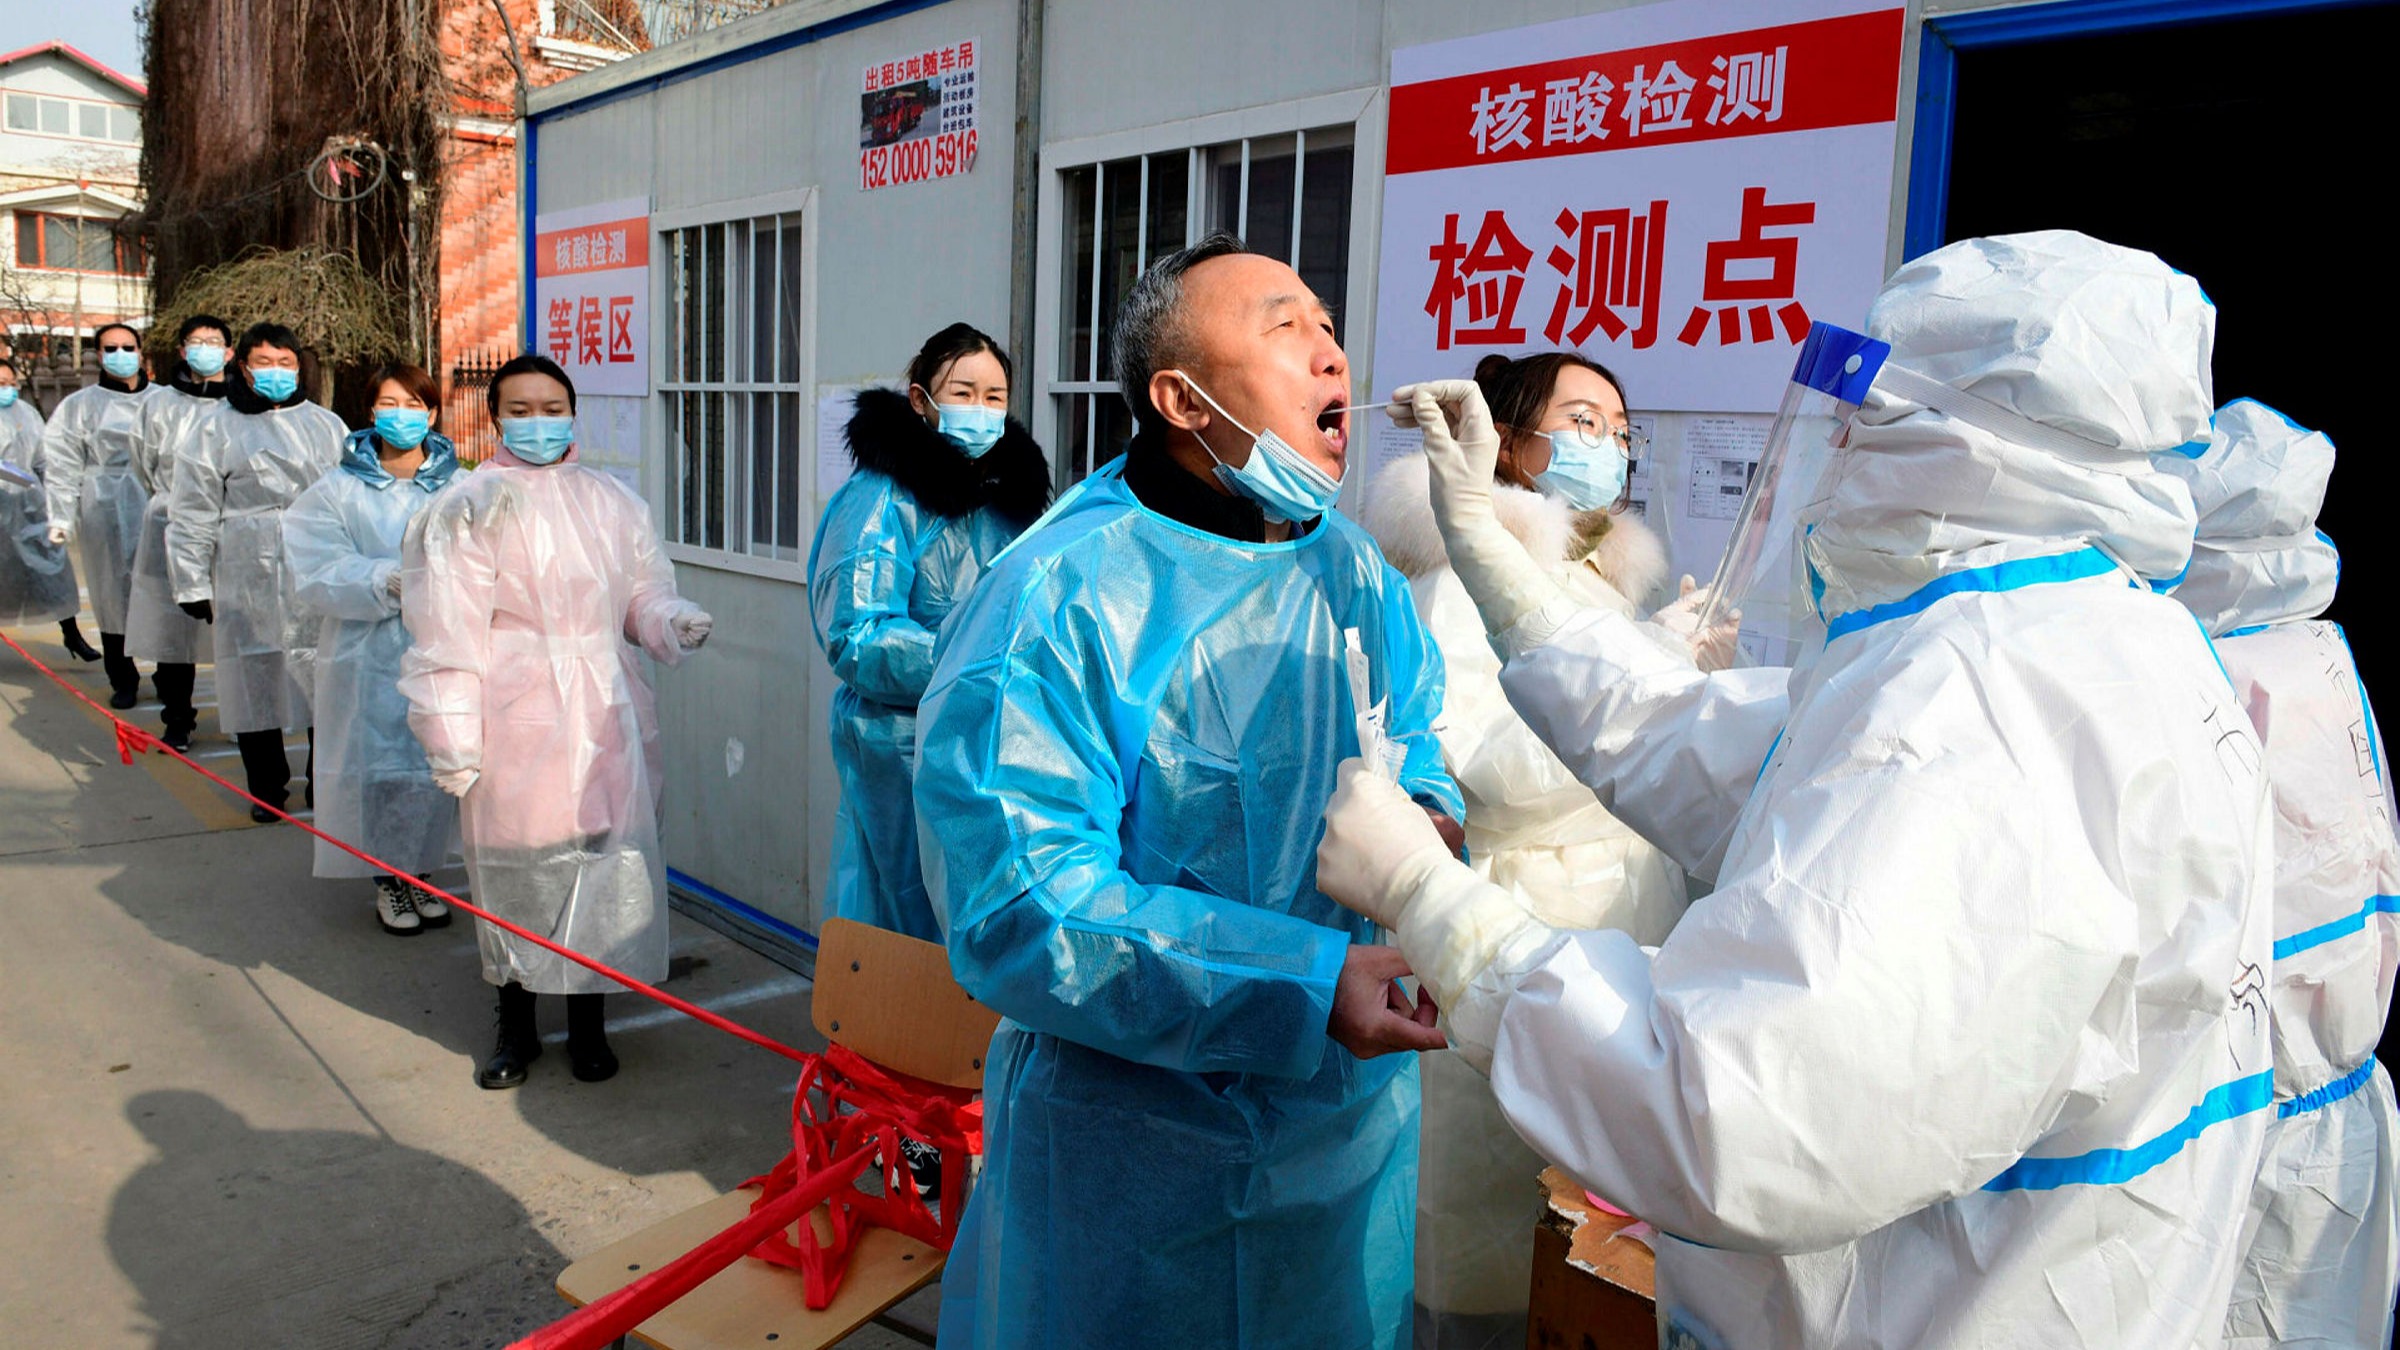 China escalates fight against new Covid outbreak and US blame game | Financial Times